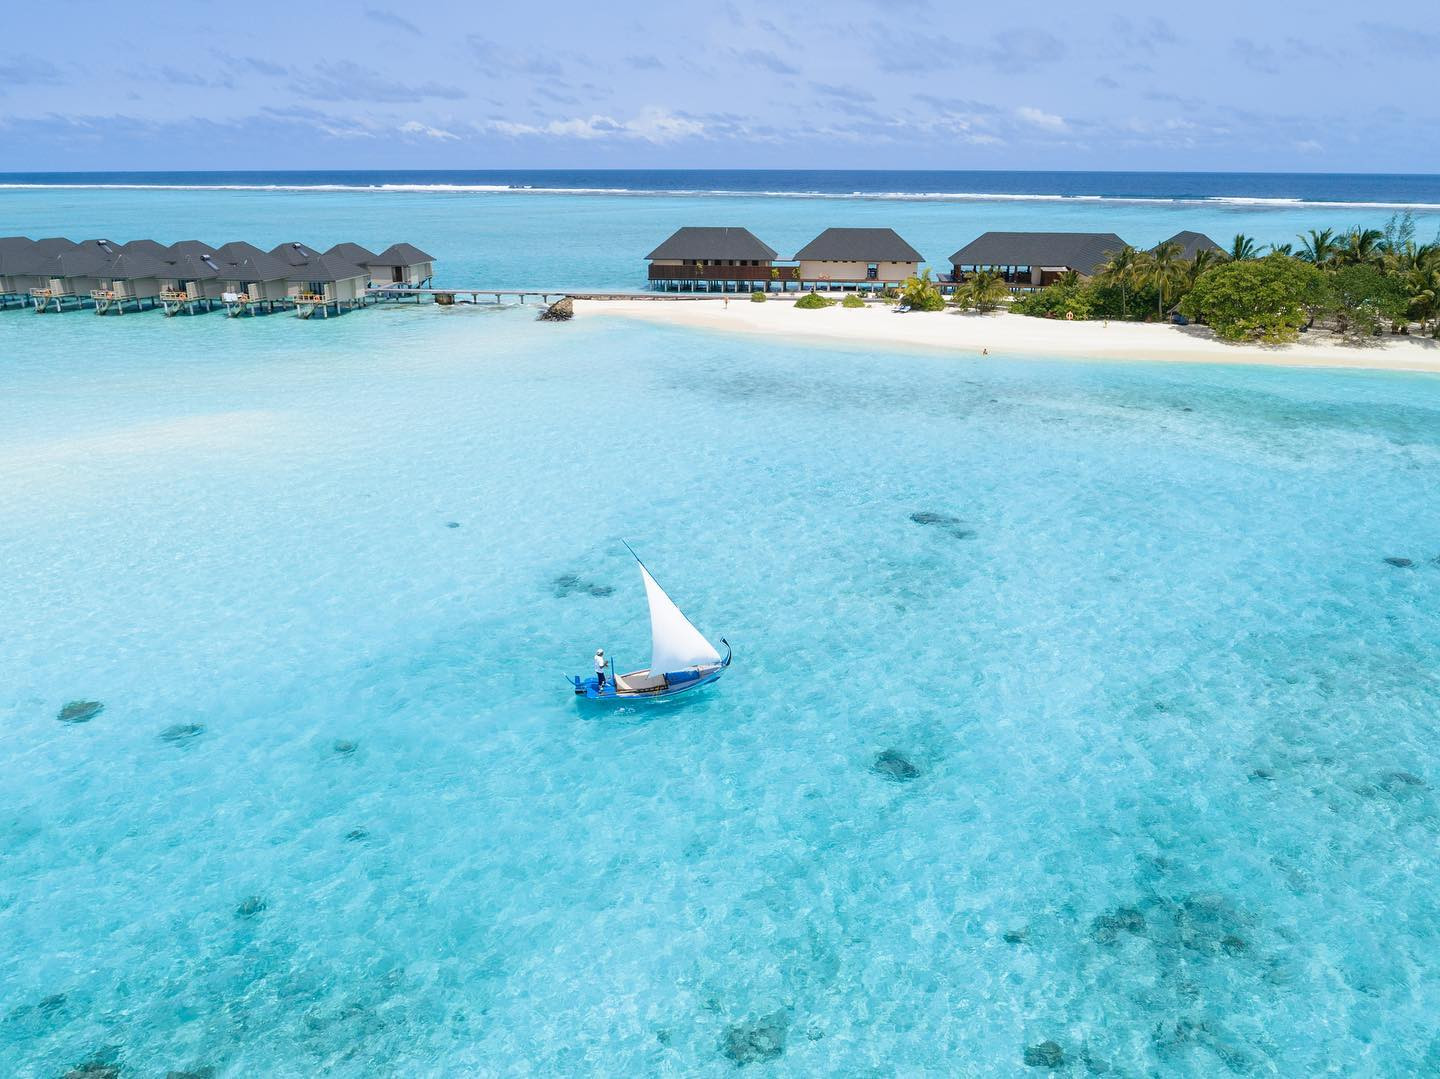 Summer Island Maldives Introduces Frontliners Giveaway!